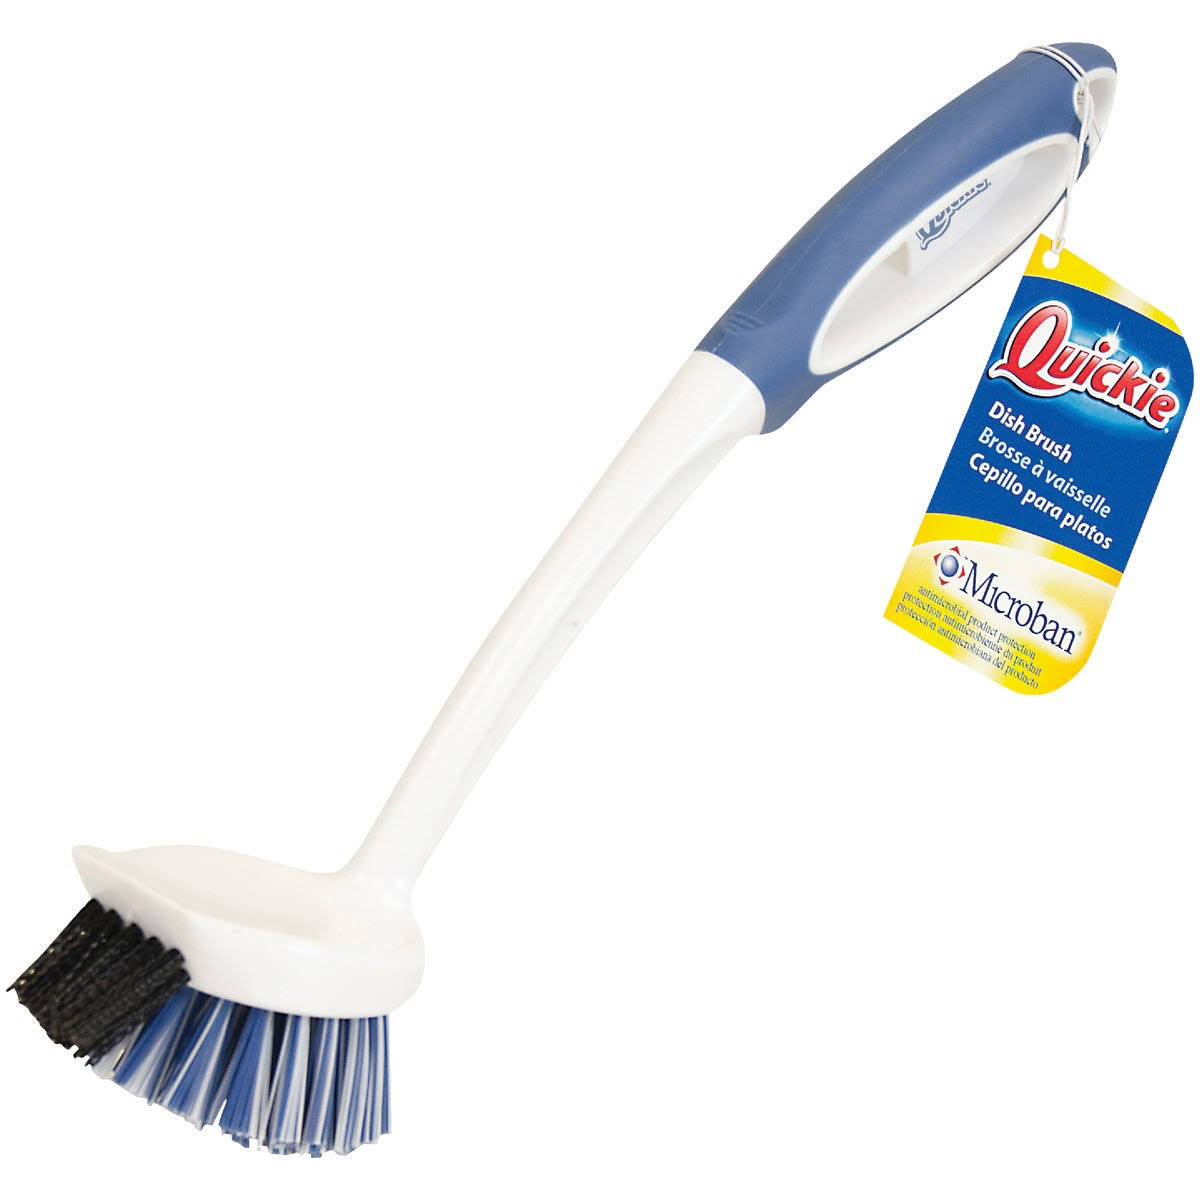 Quickie Dishwashing Brush - with Microban, Blue and White